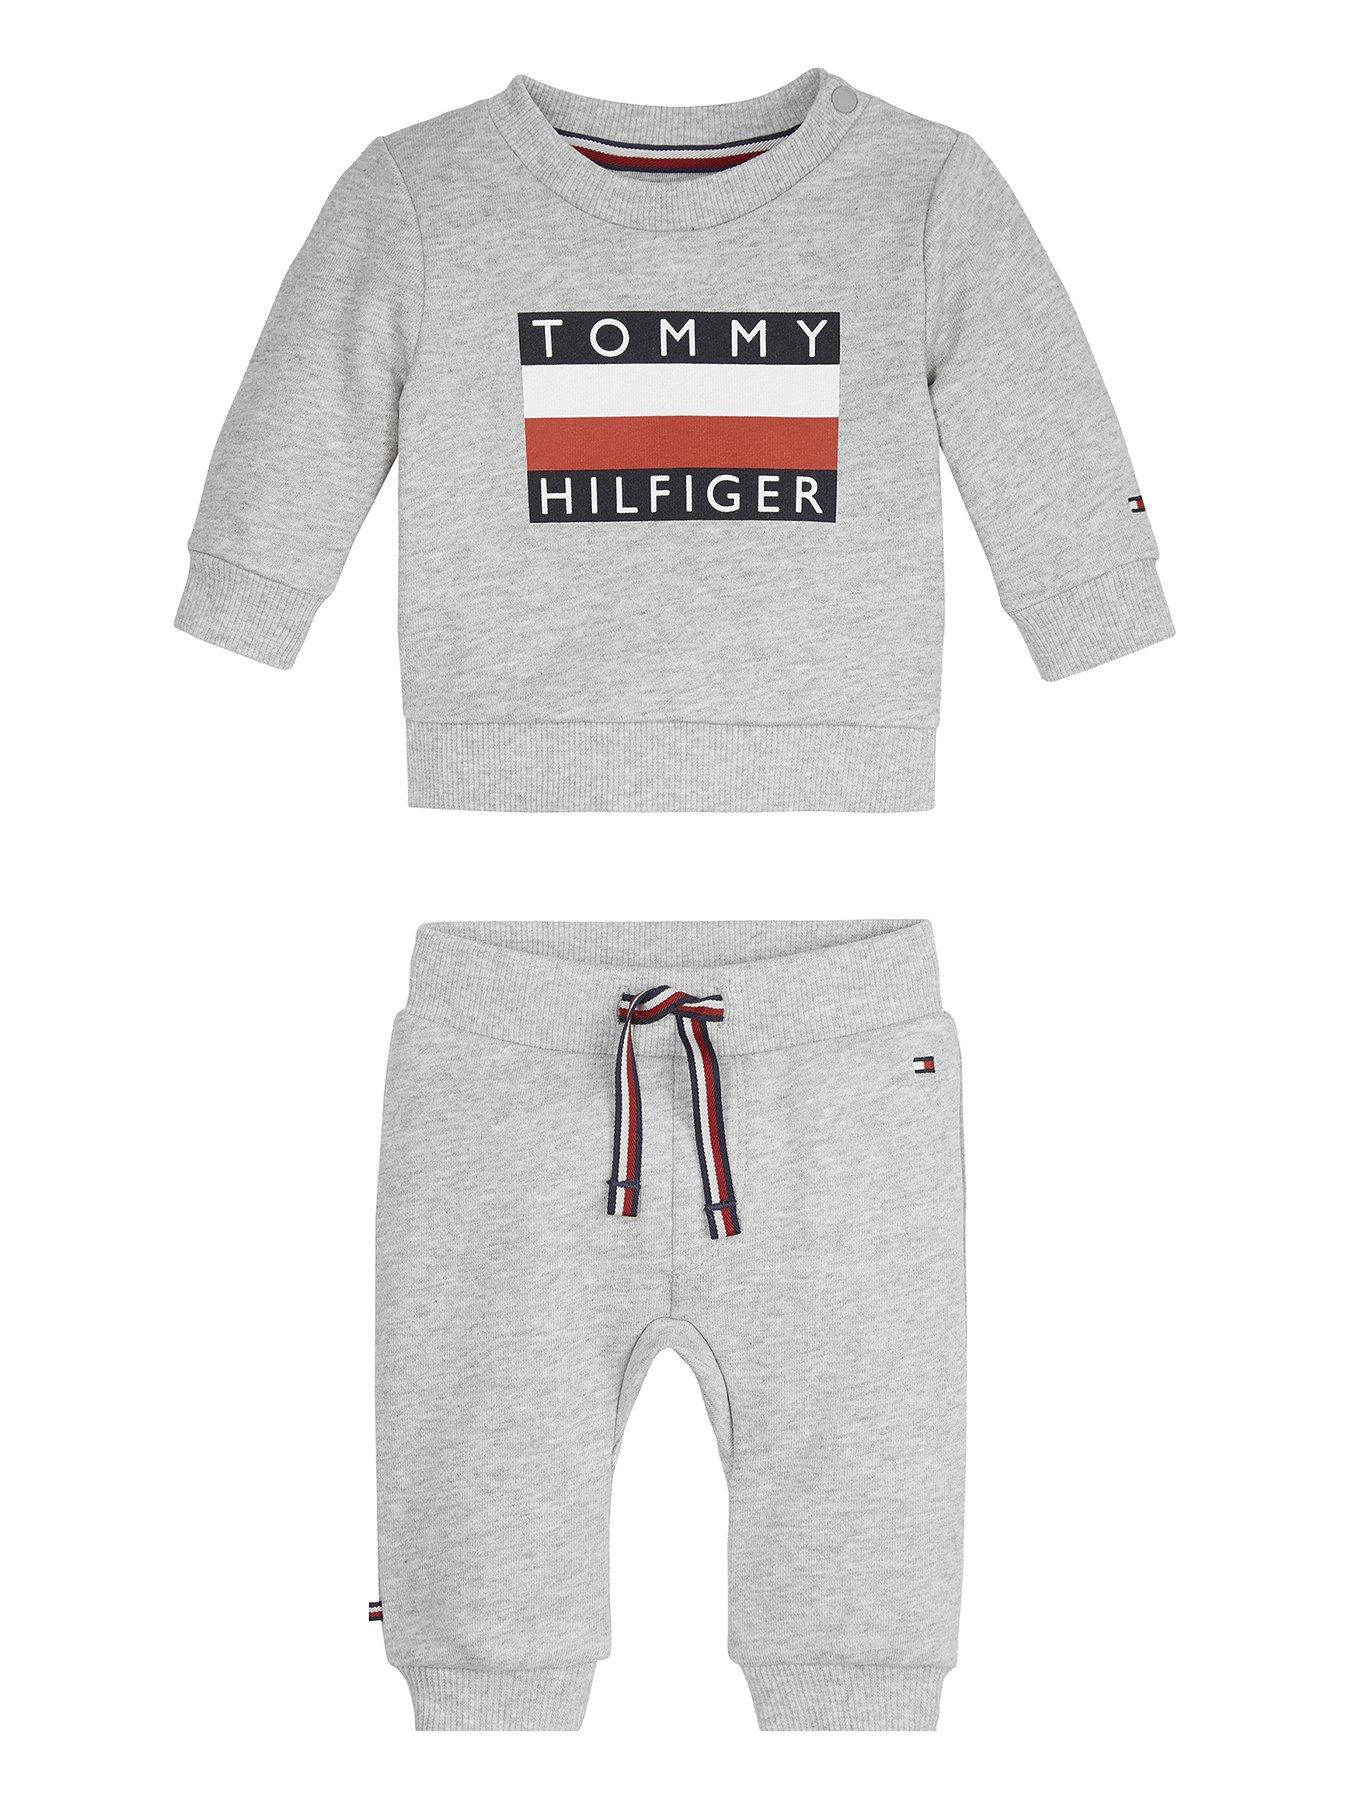 tommy hilfiger baby boy clothes 